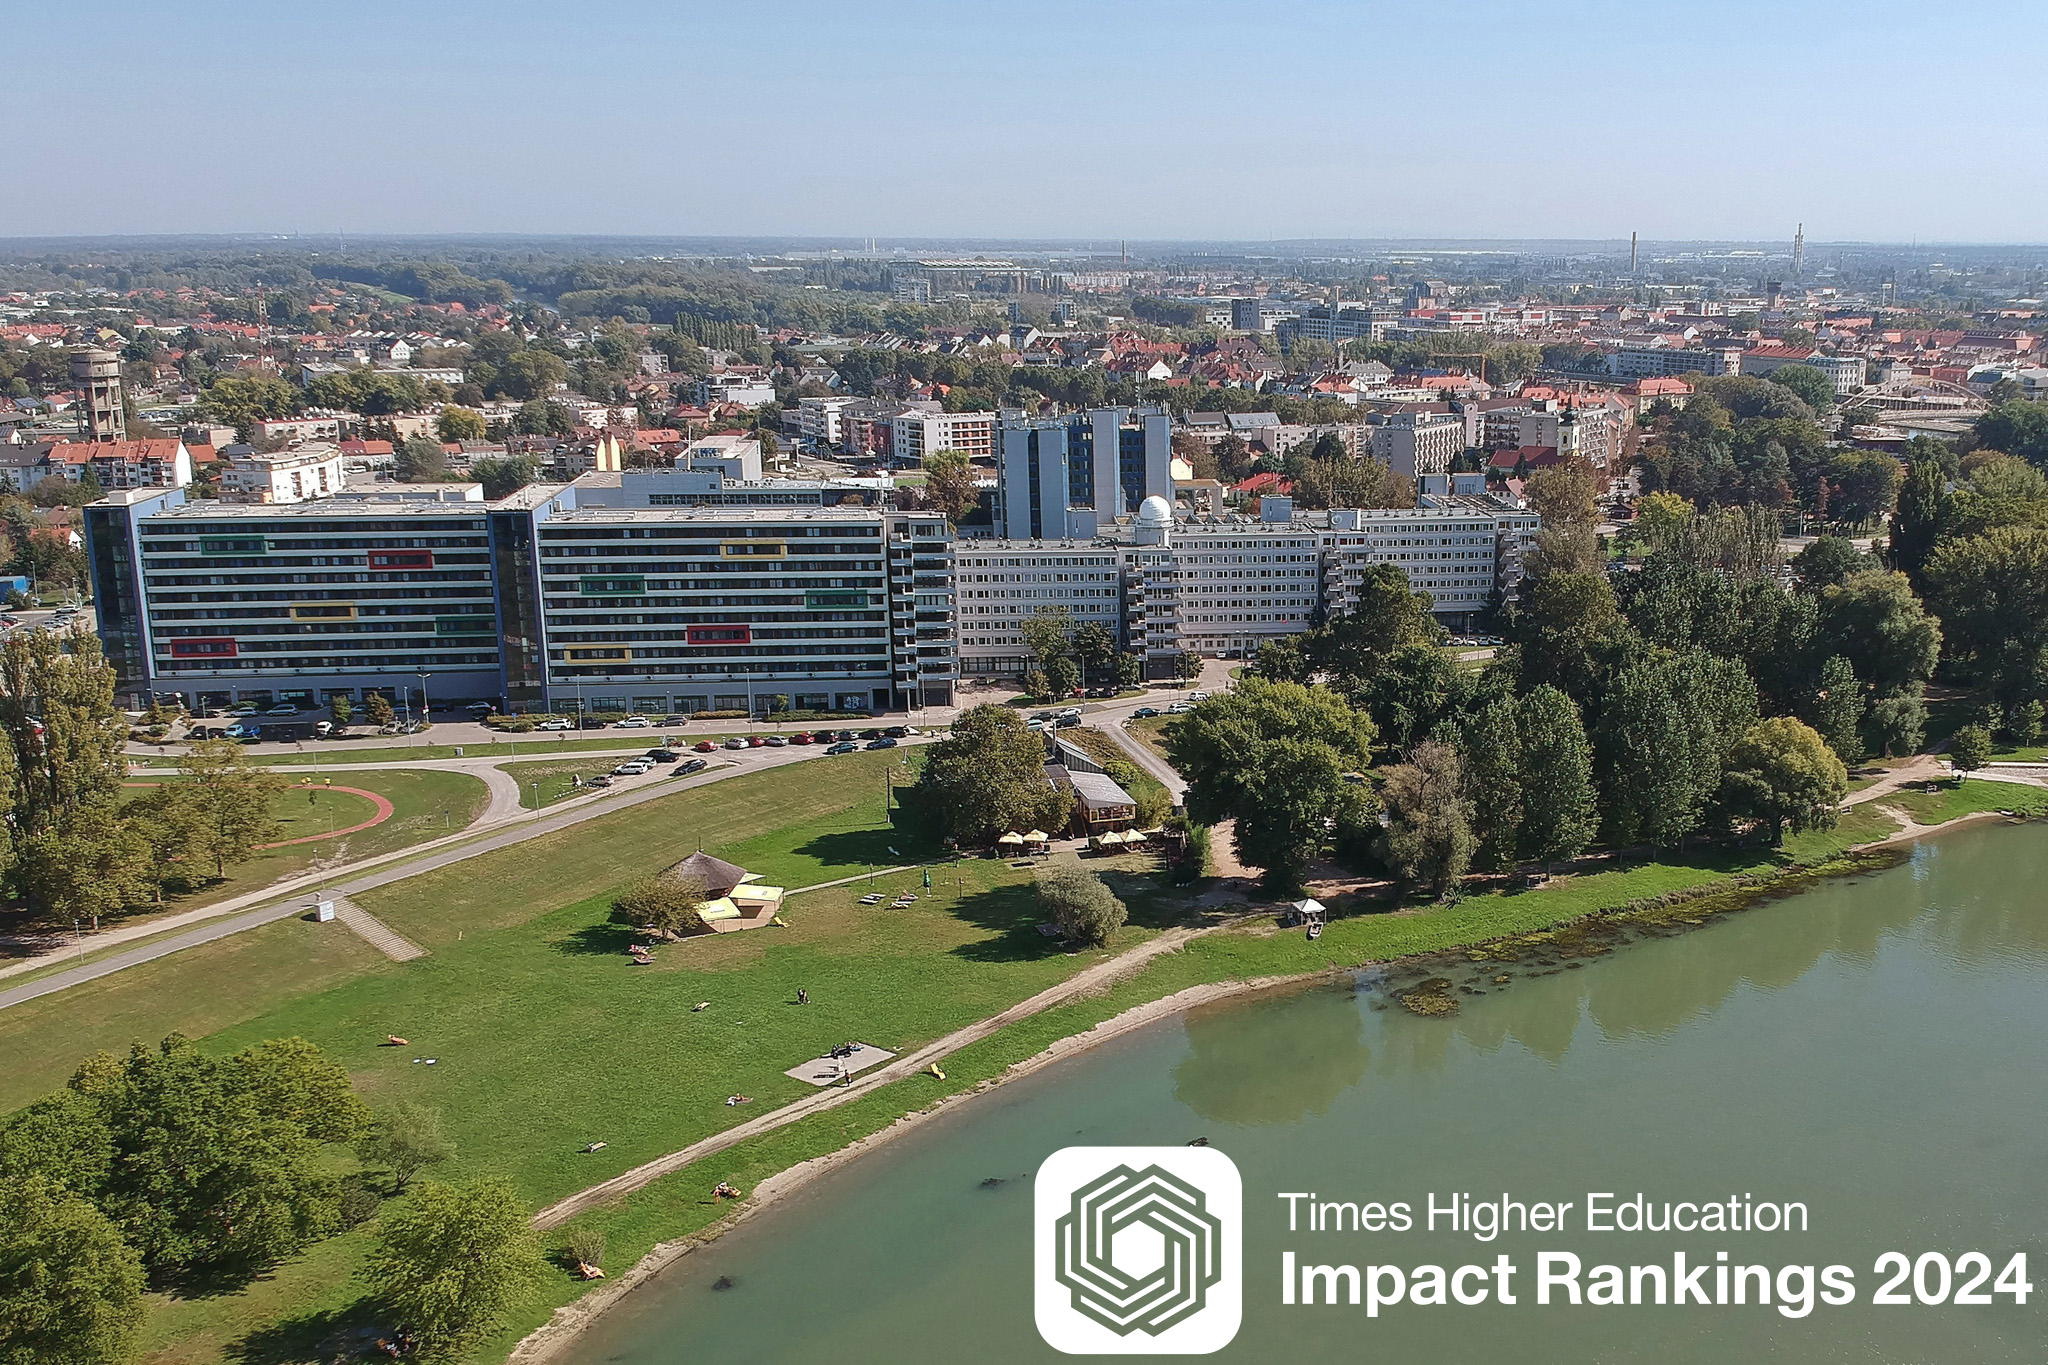 The success of Széchenyi István University's sustainability efforts is further validated by its performance in the THE Impact Rankings.